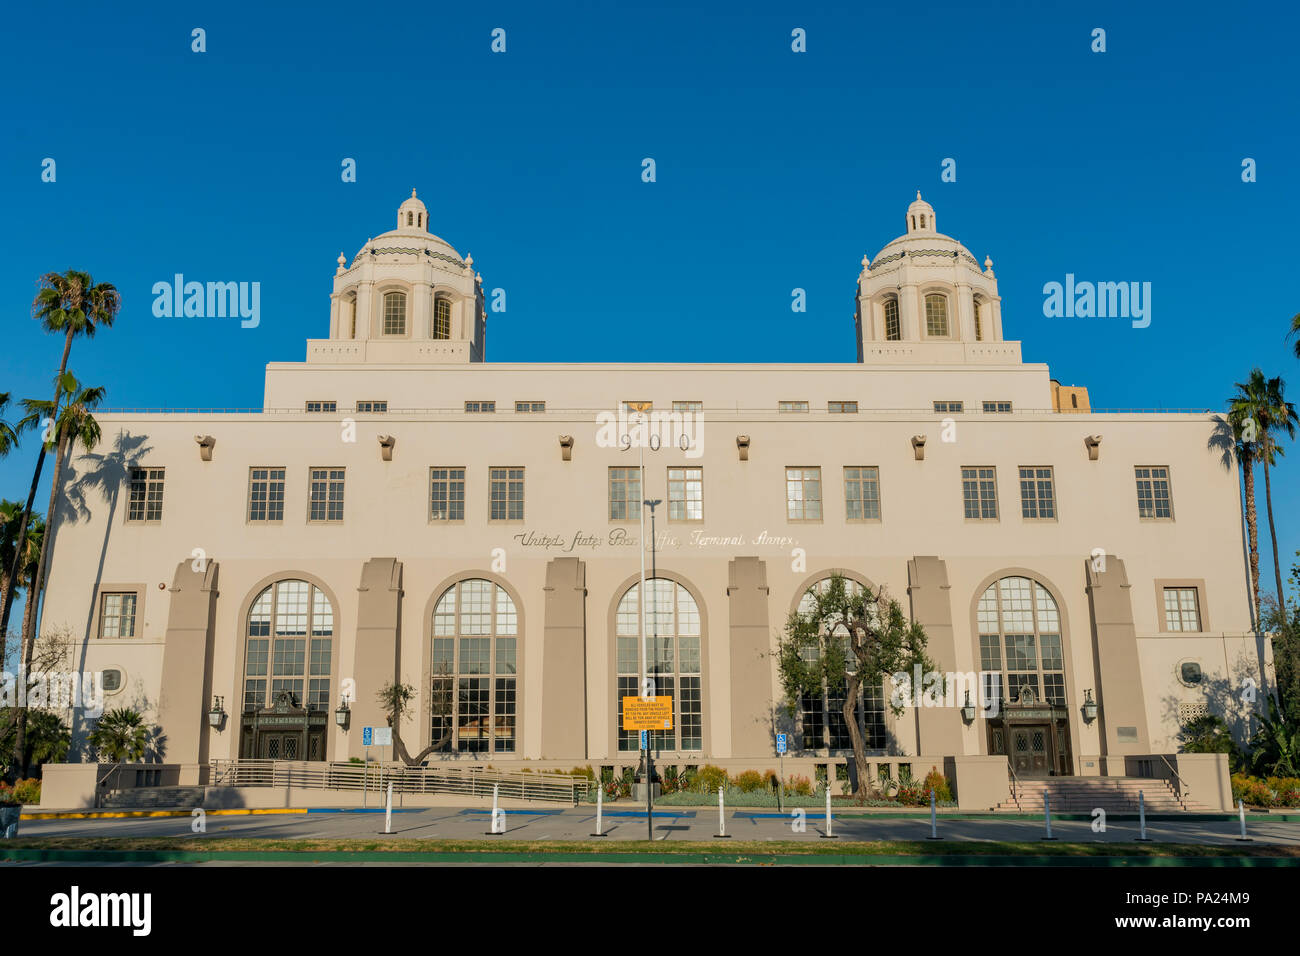 Los Angeles, JUL 12: Special building of the USPS in downtown on JUL 12, 2018 at Los Angeles, California Stock Photo